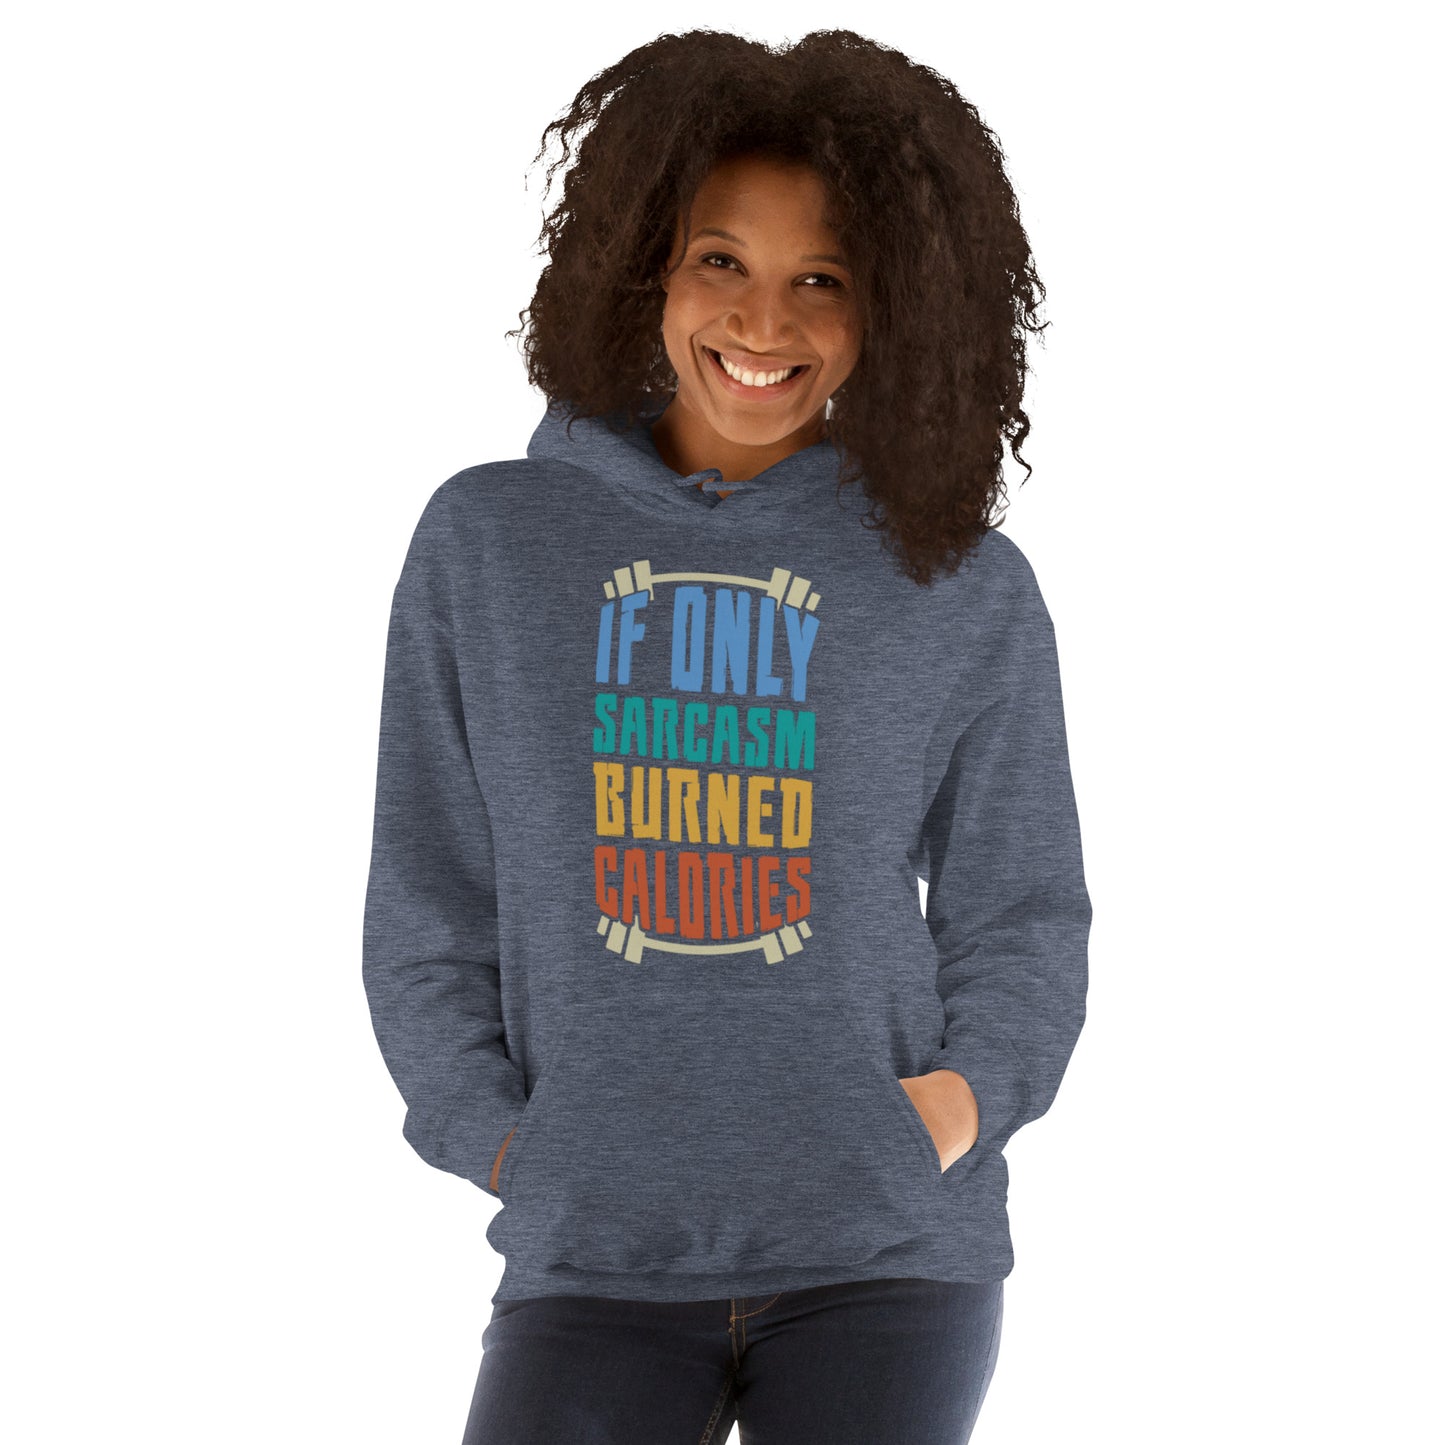 If Only Sarcasm Burned Calories Unisex Hoodie